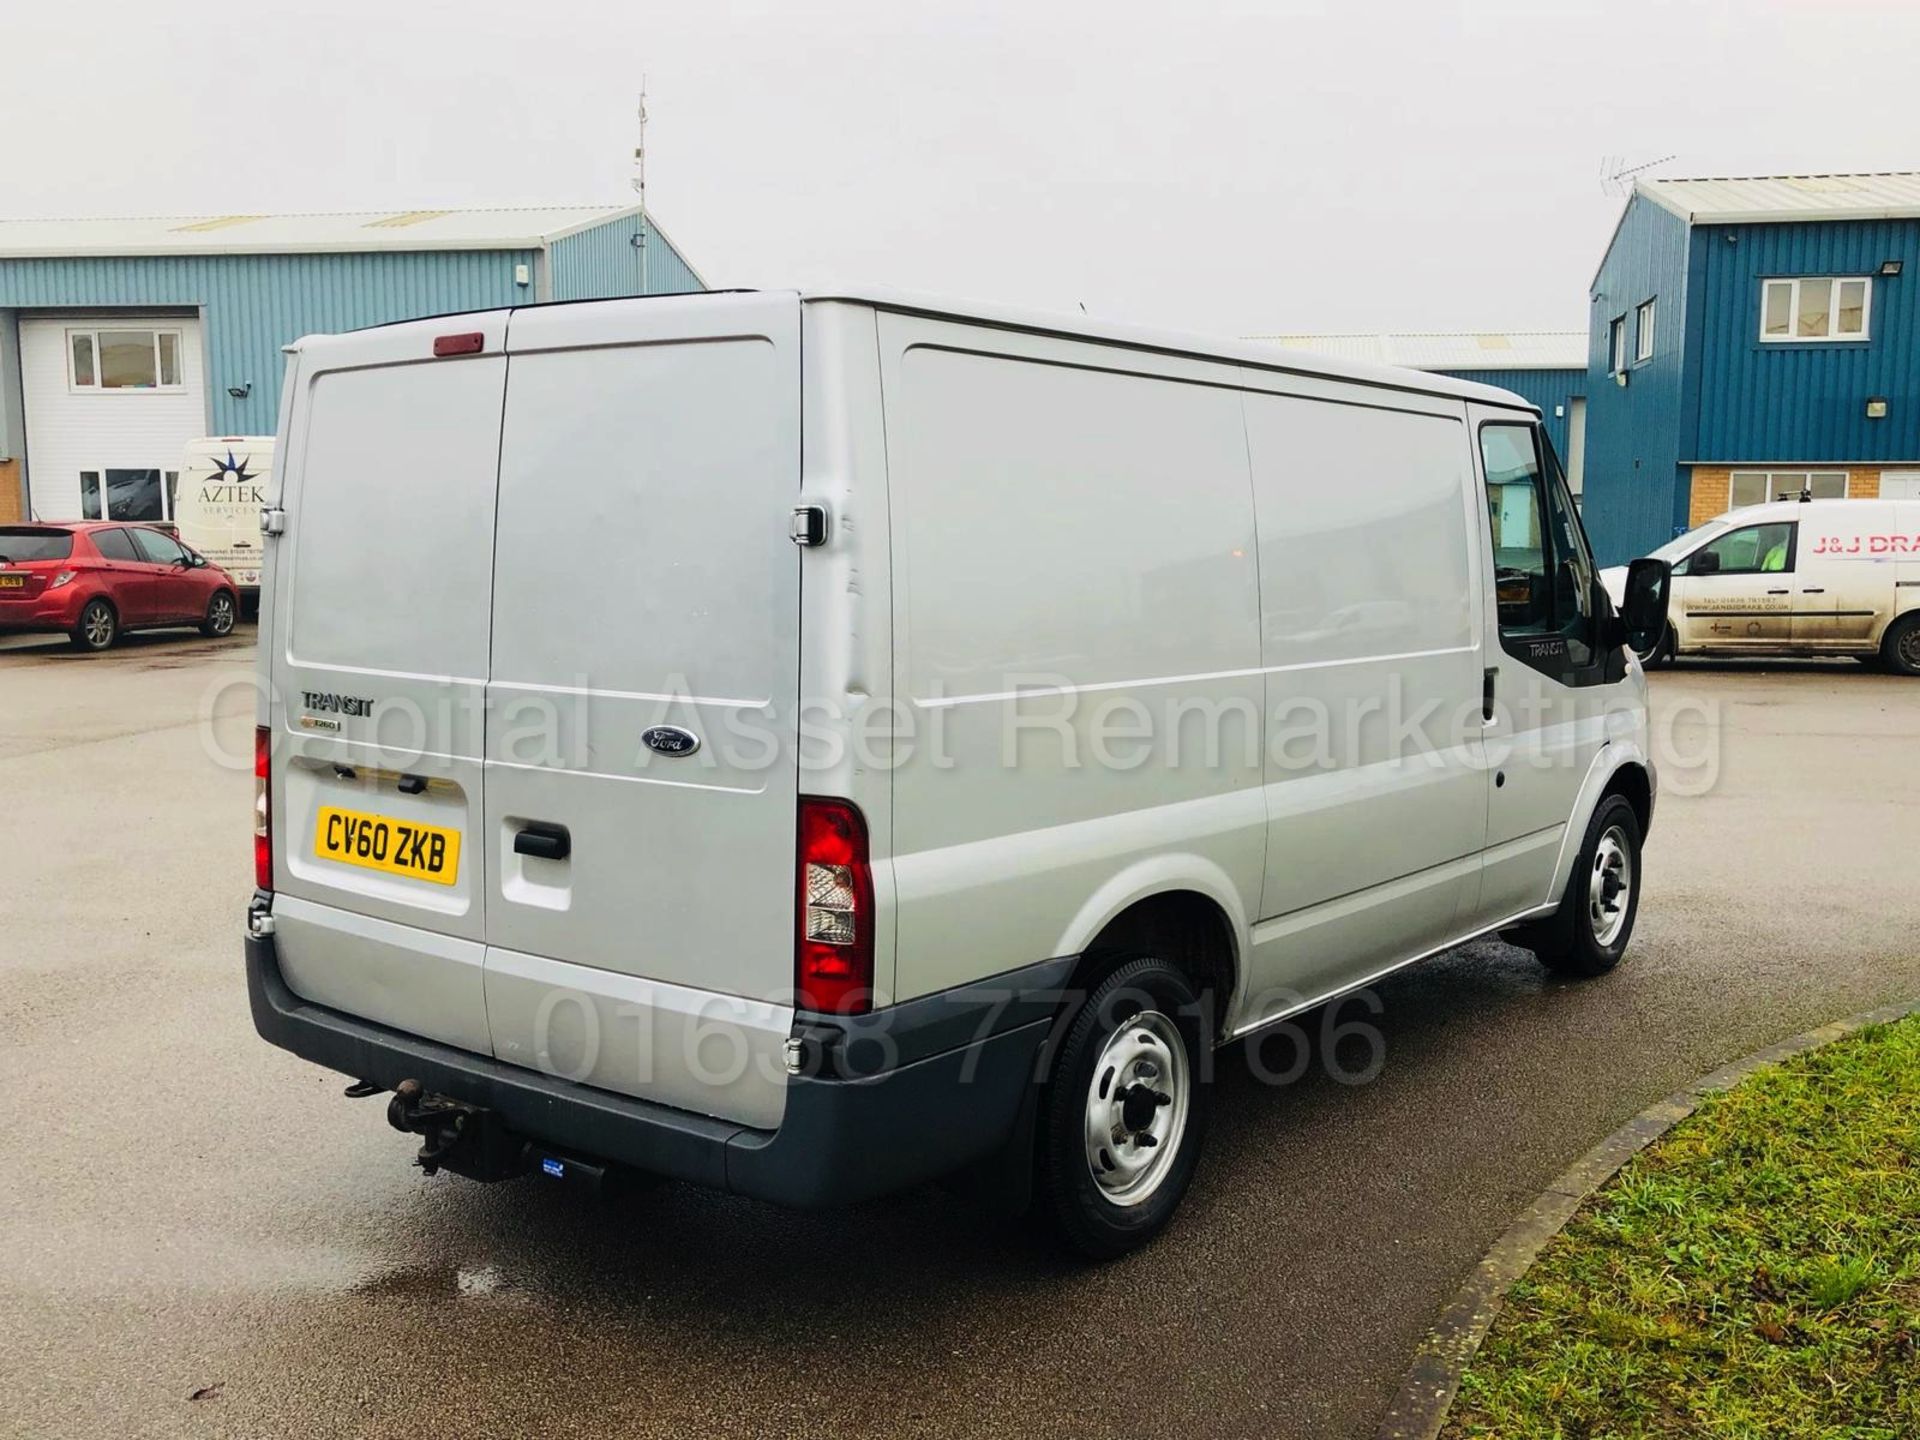 FORD TRANSIT 85 T260S FWD 'SWB' (2011 MODEL) '2.2 TDCI - 85 BHP - 5 SPEED' **ULTRA LOW MILES** - Image 7 of 22